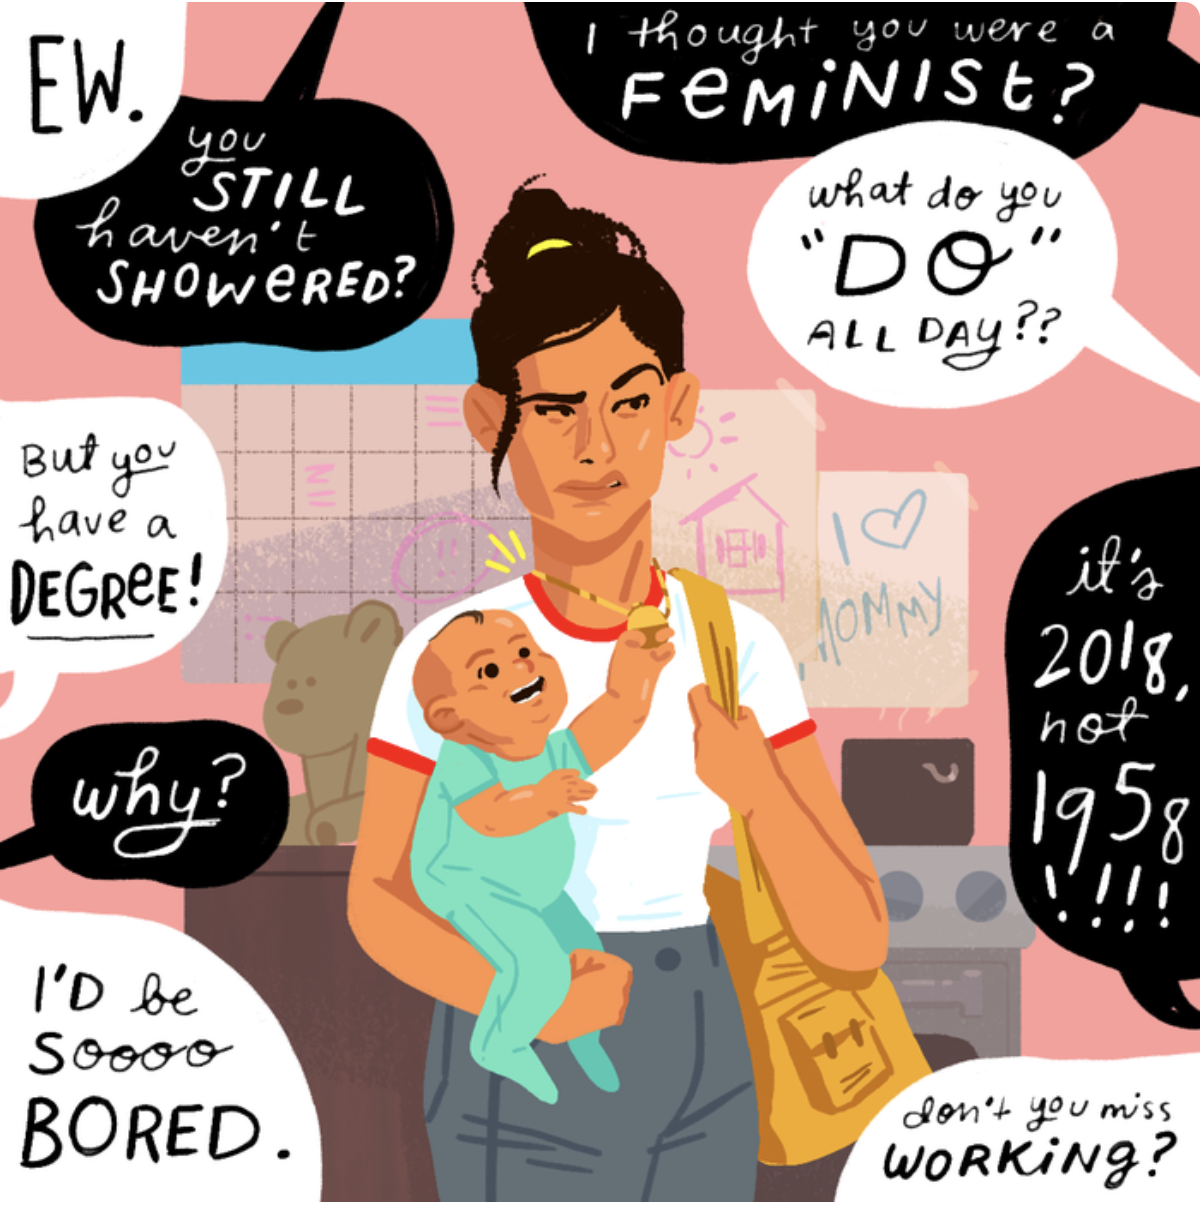 A woman holds a baby and judged by others